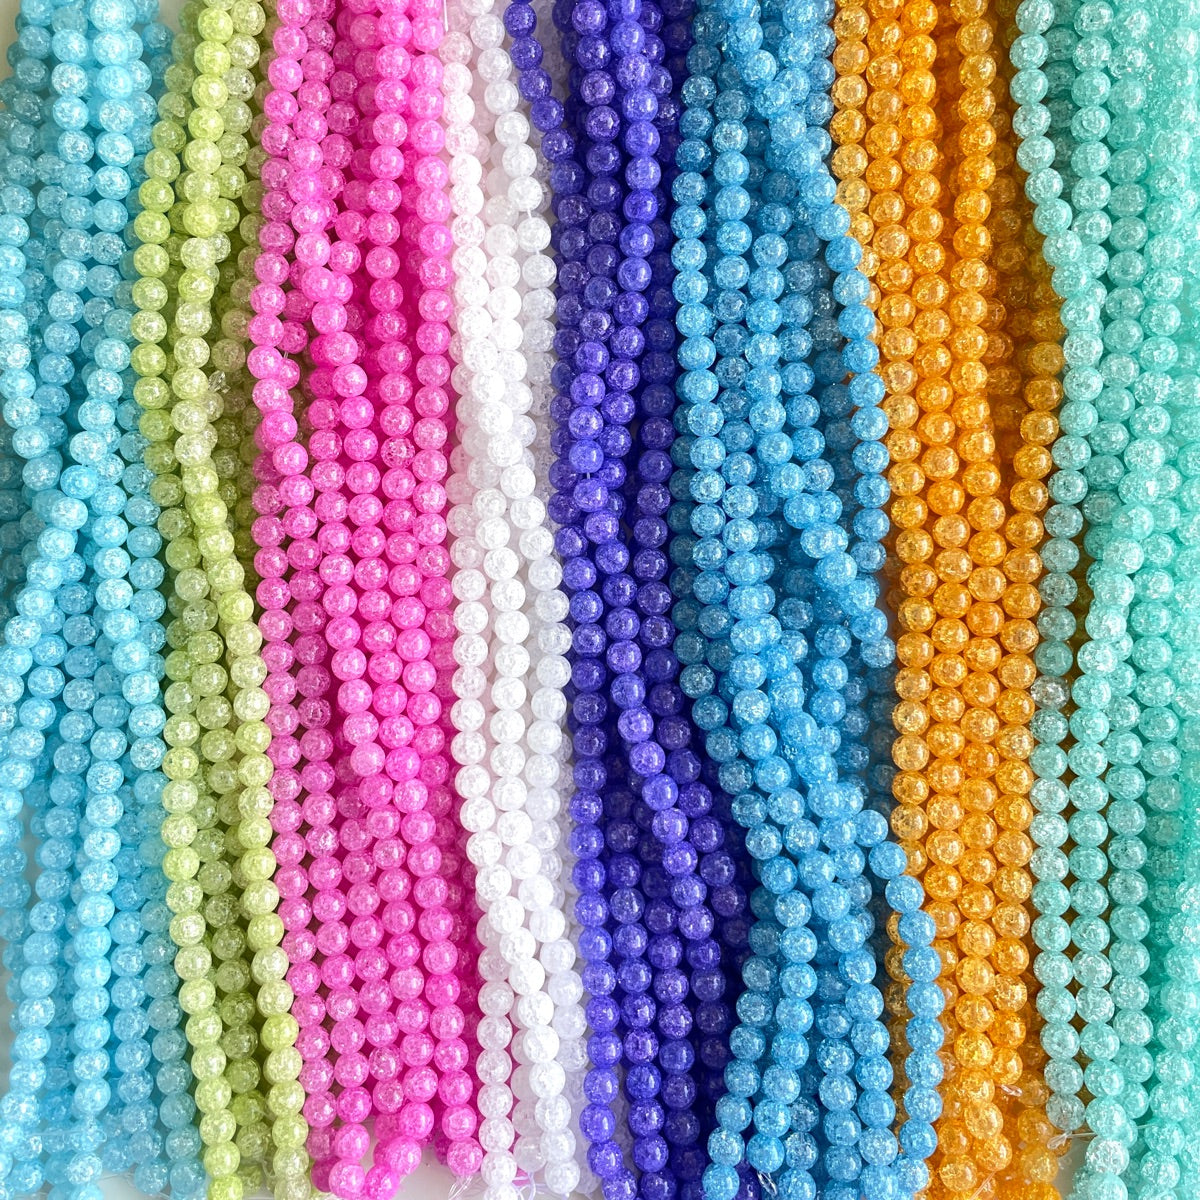 2 Strands/lot 10mm Colorful Popcorn Crystal Round Beads Stone Beads New Beads Arrivals Other Stone Beads Charms Beads Beyond